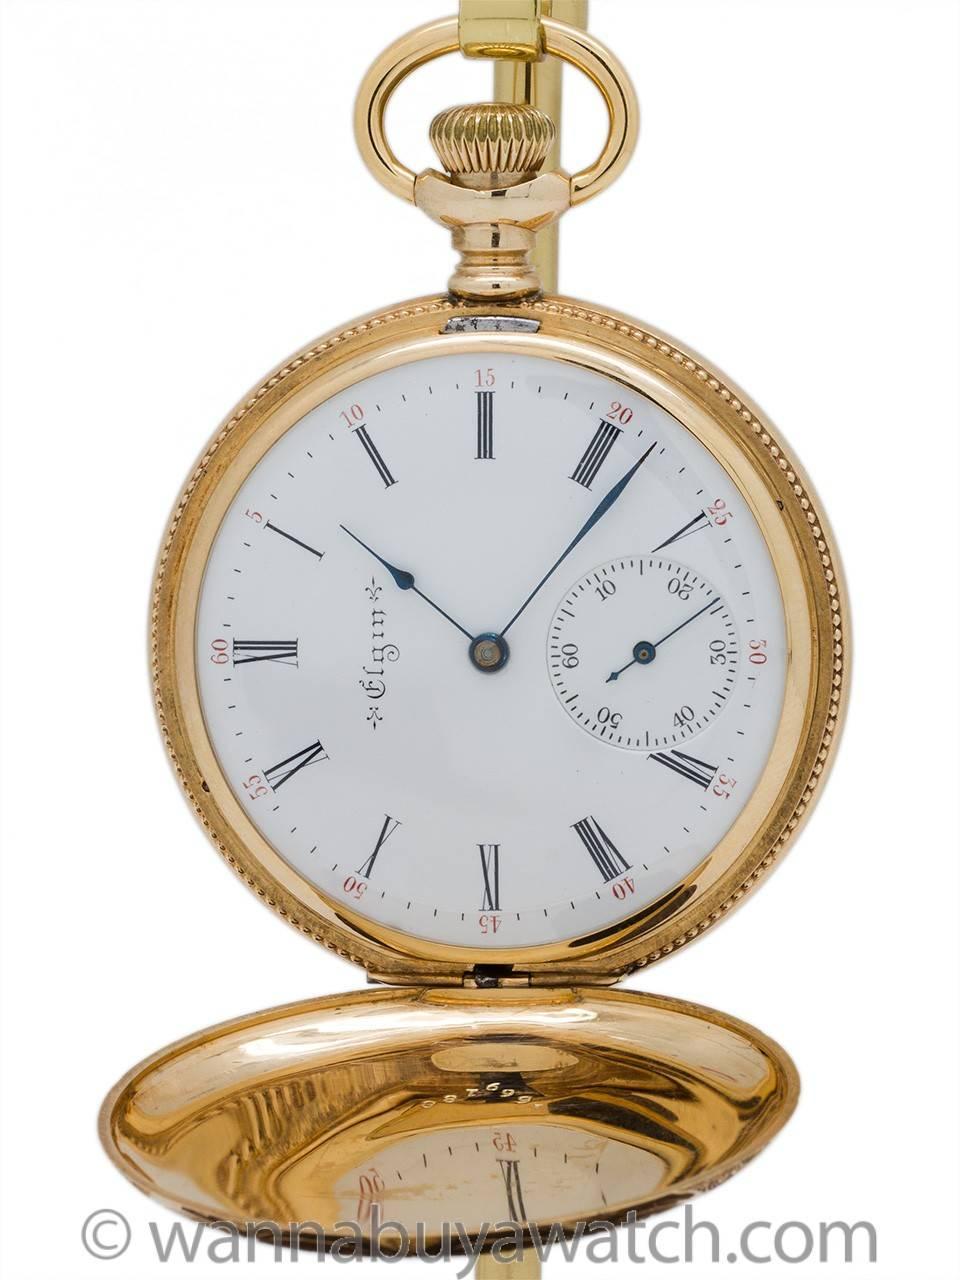 Elgin 14k yellow gold size 16-S (50mm) hunting case pocket watch, Circa 1902. Gorgeous condition beautifully engraved case design, no personalized engraving. Elgin 15-jewel high-grade three-bridge movement with beautifully damaskeened plates. White